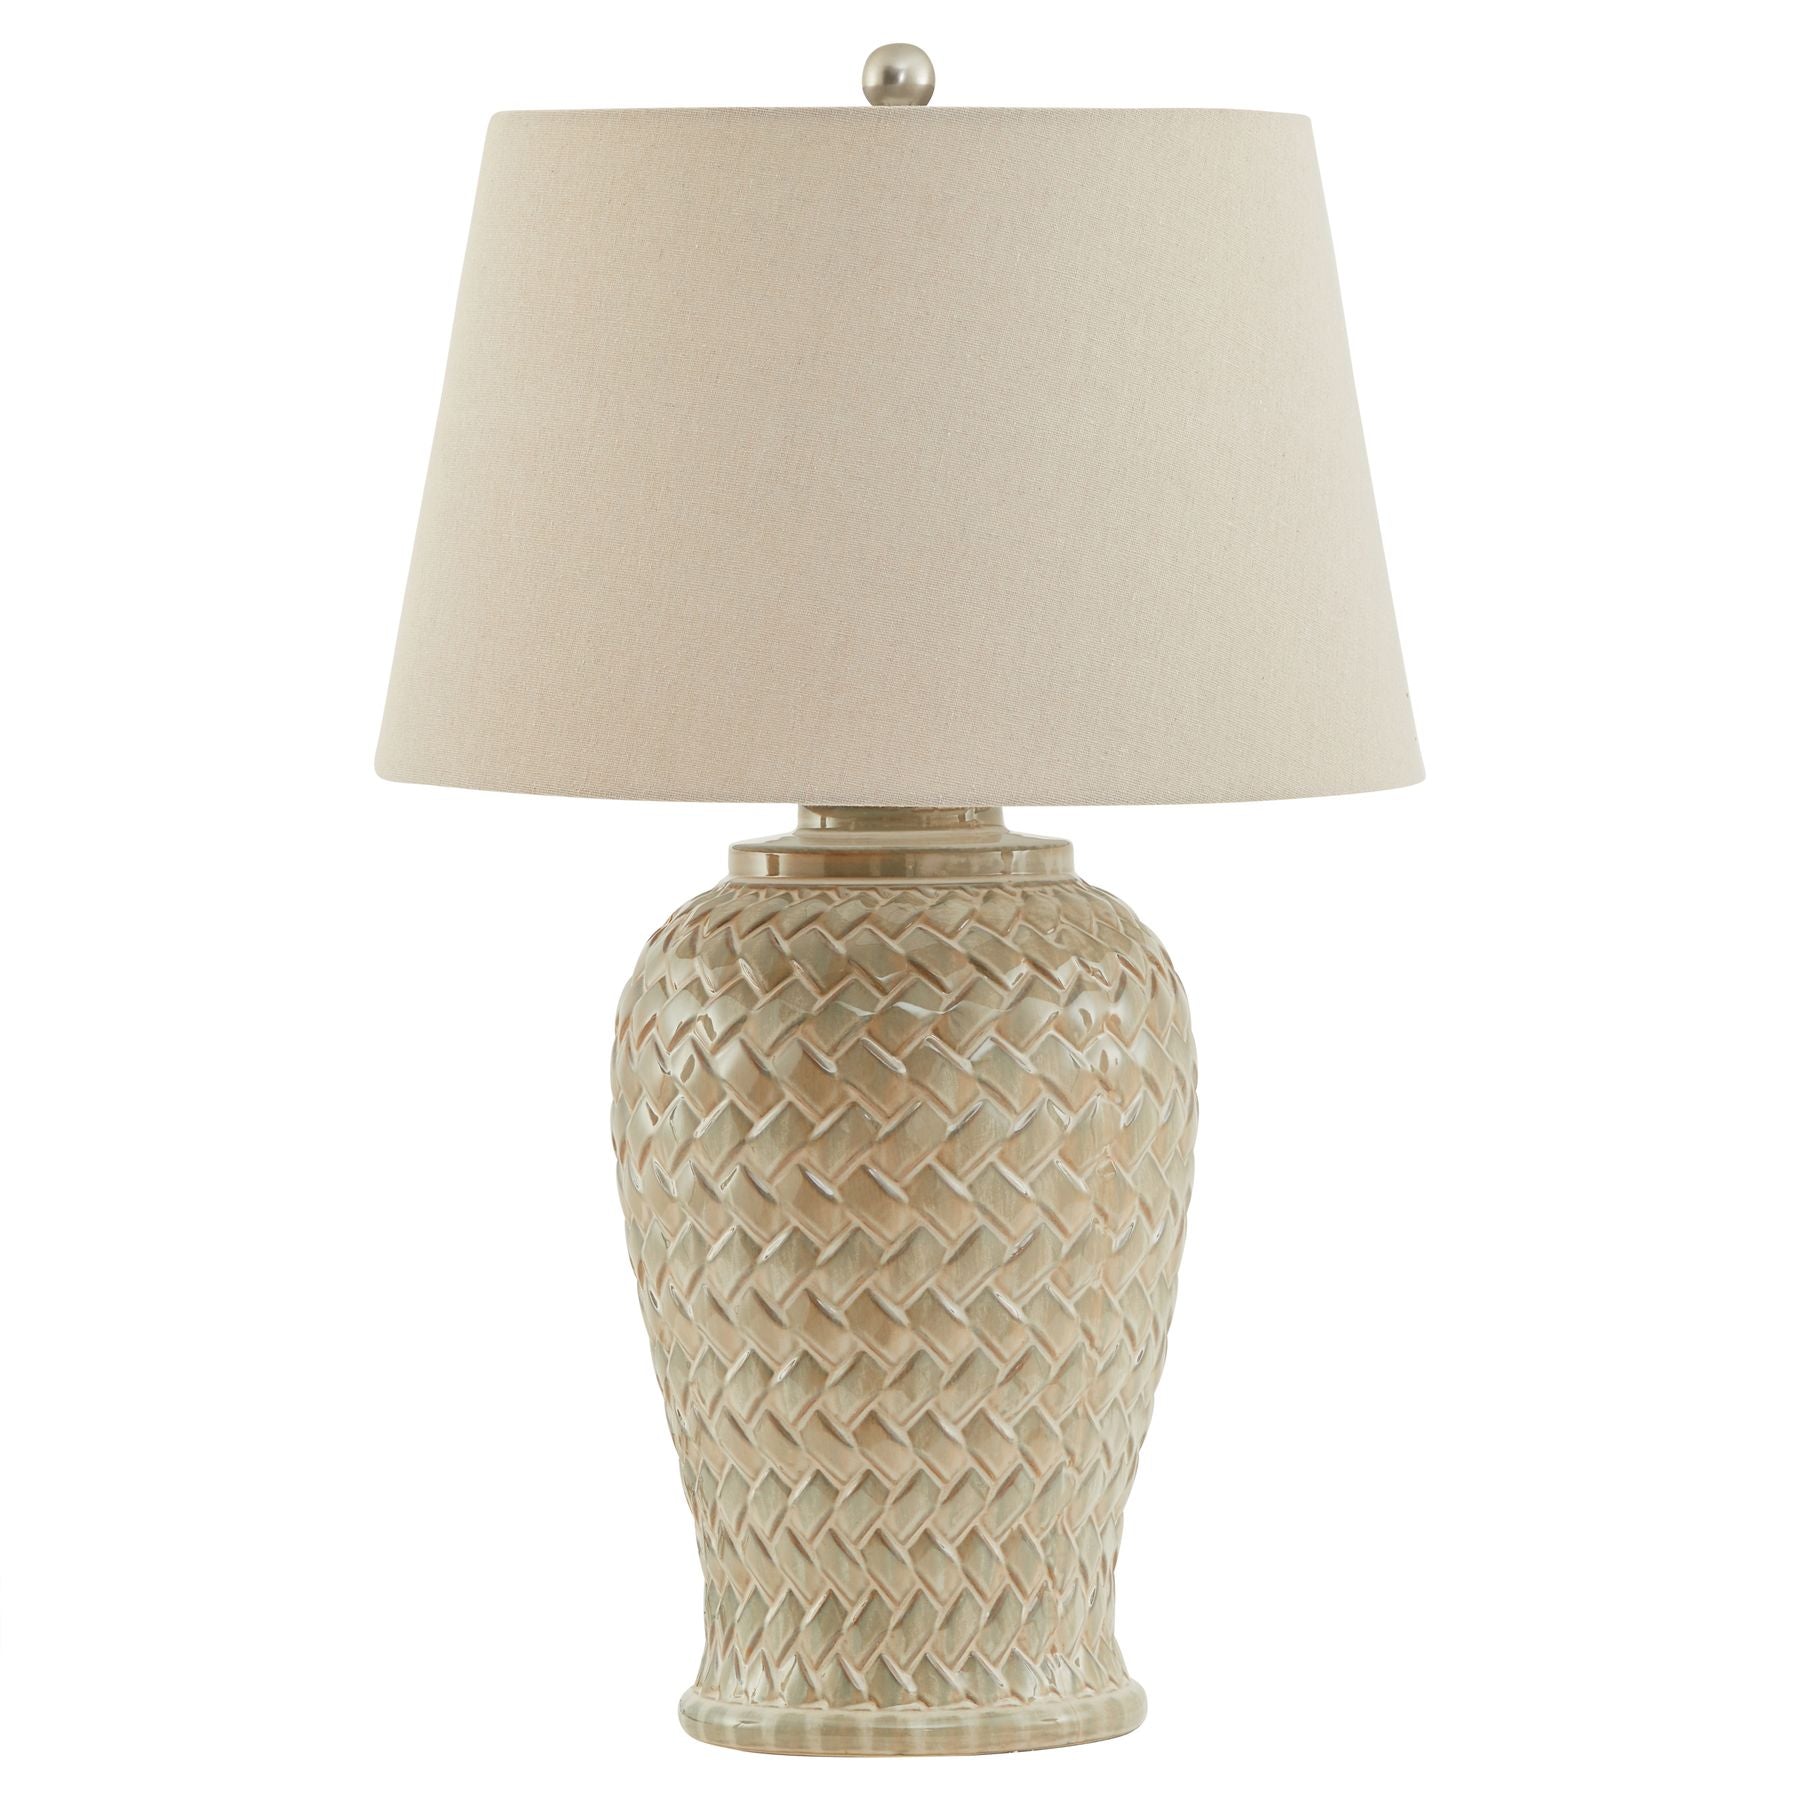 The Woven Lamp